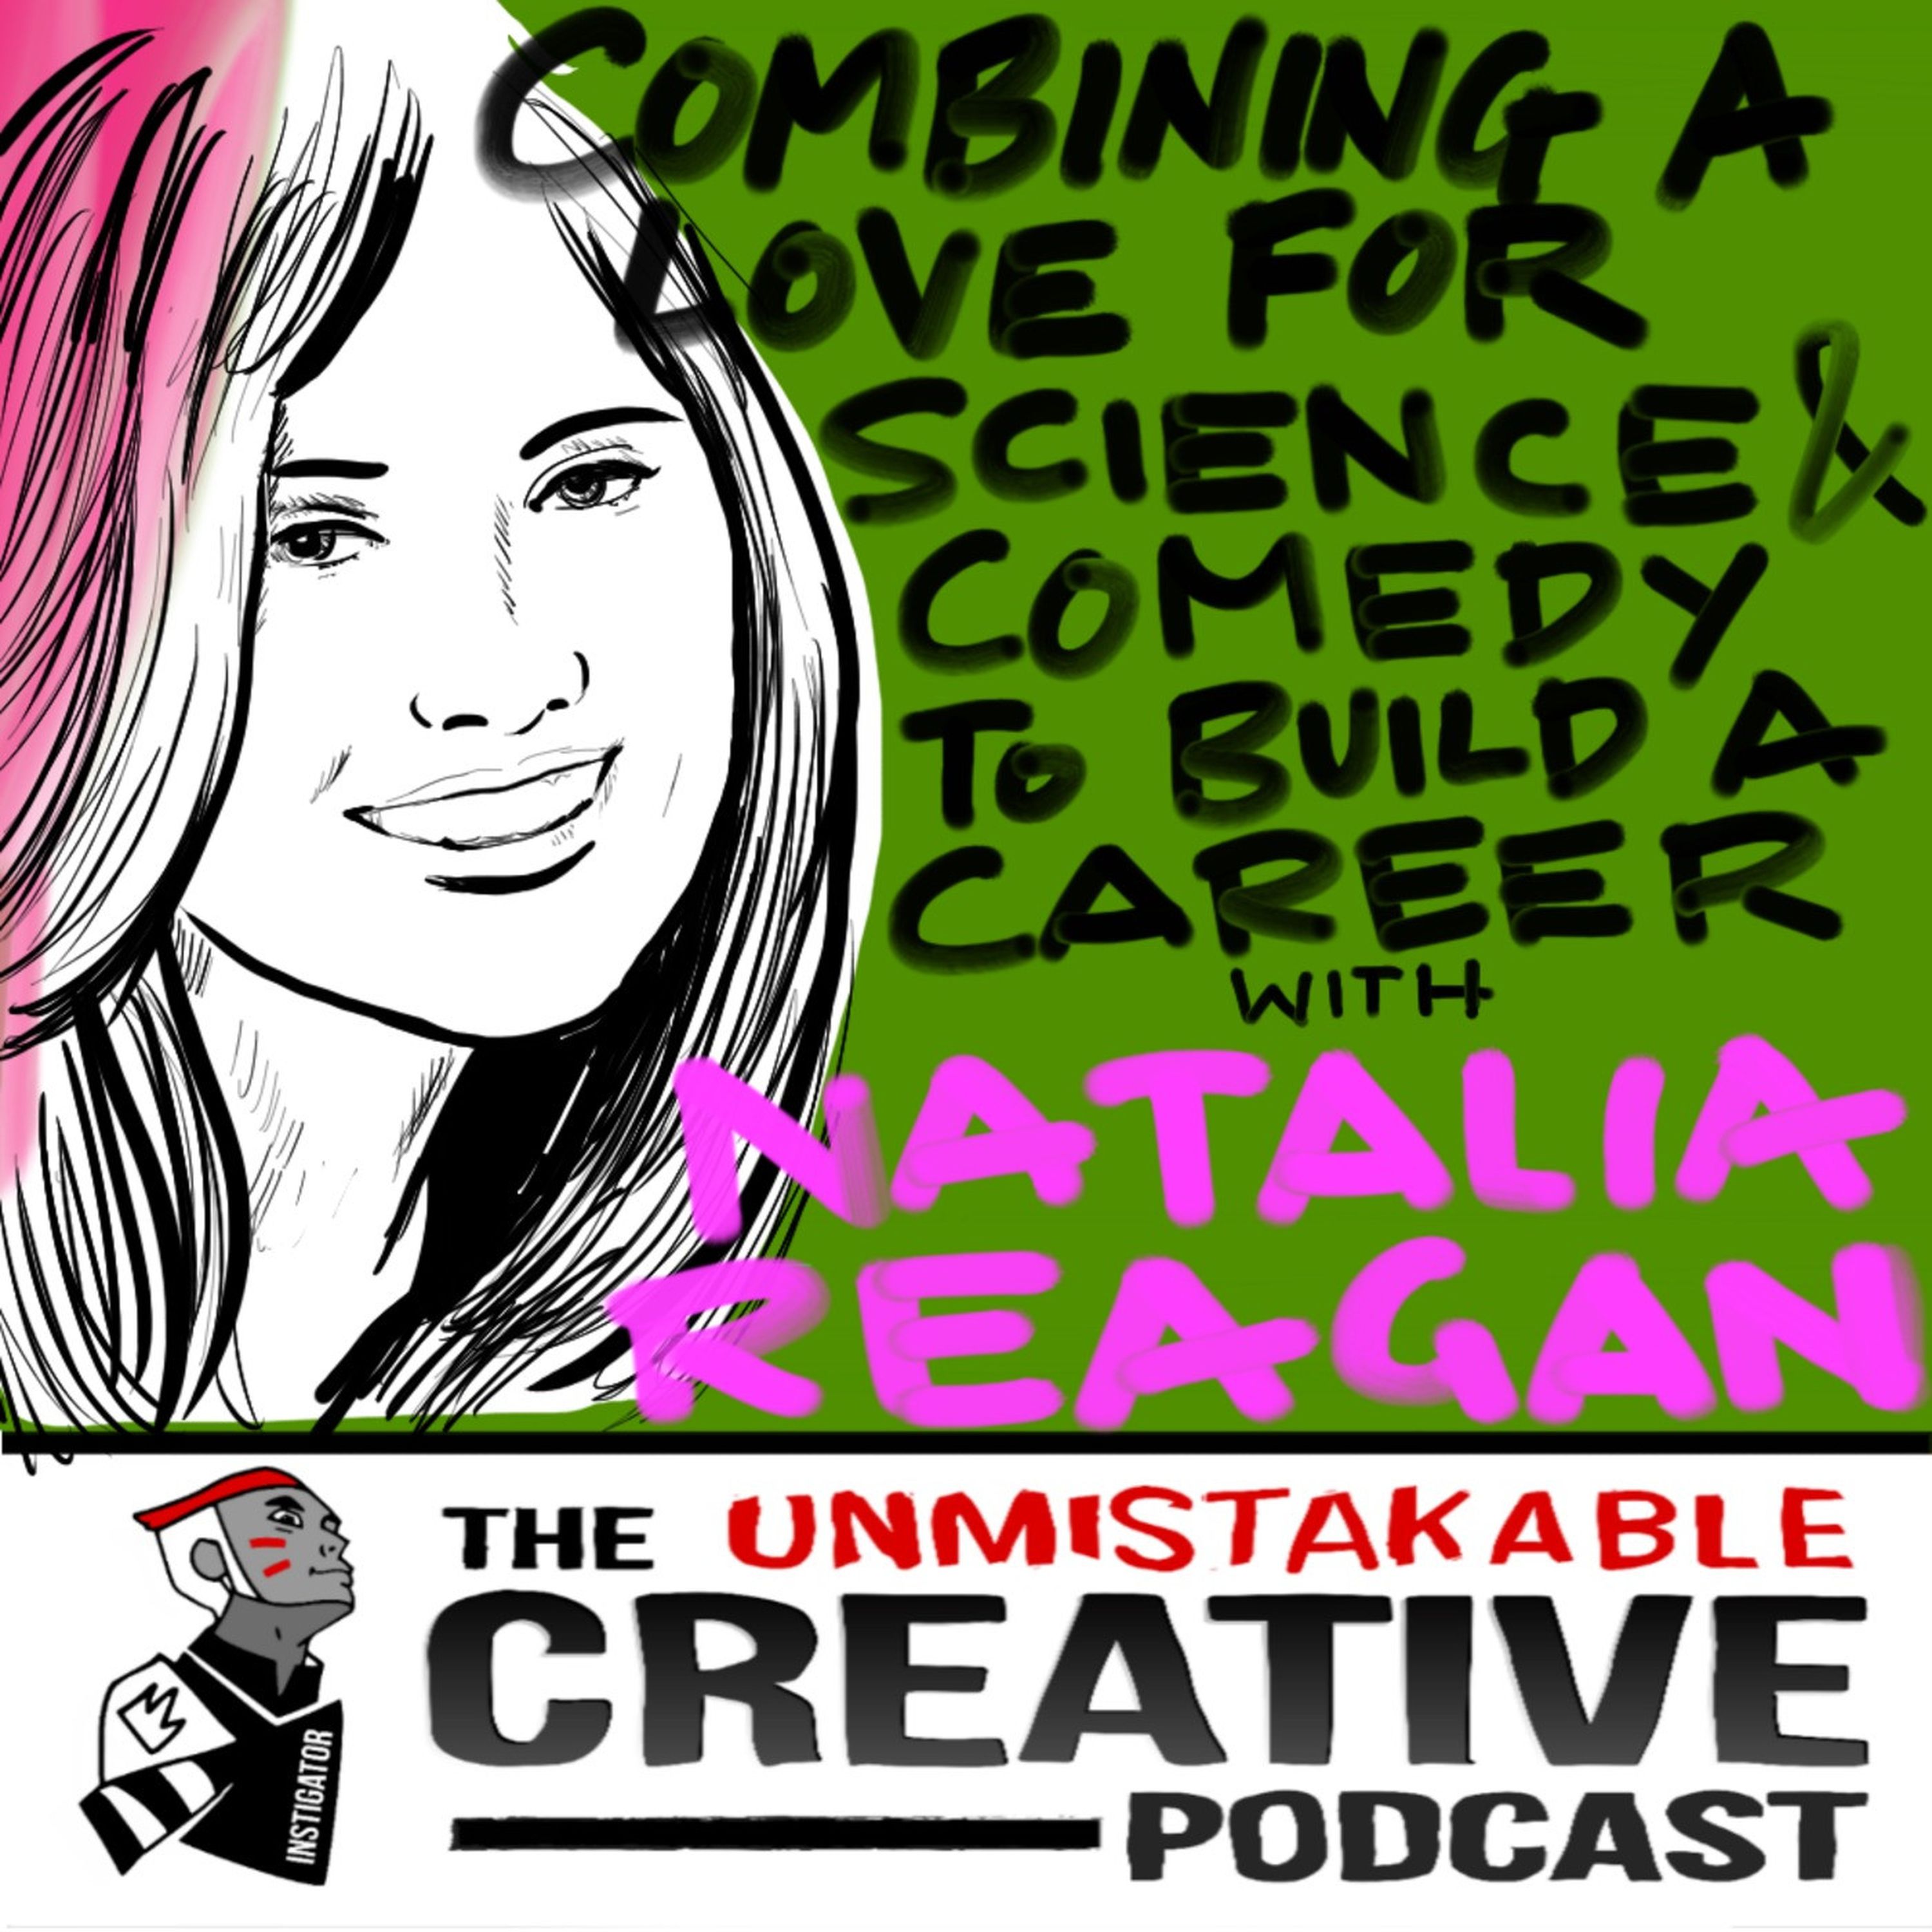 Combining a Love for Science and Comedy to Build a Career with Natalia Reagan